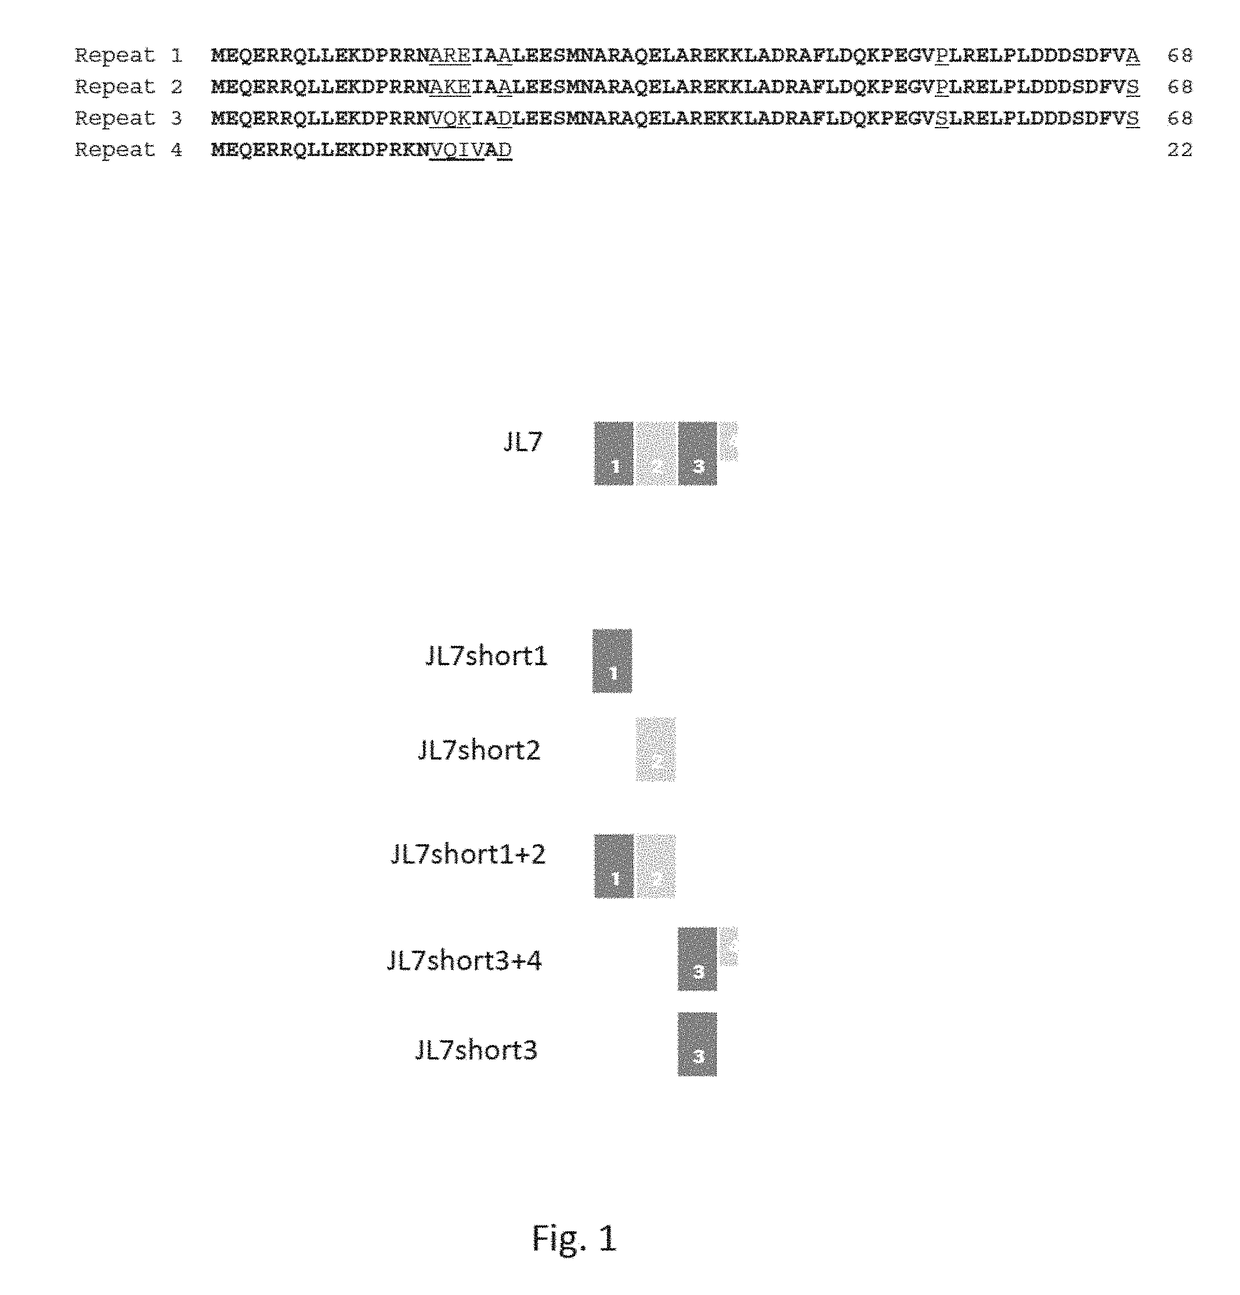 Recombinant trypanosoma cruzi jl7 antigen variants and their use for detecting chagas disease